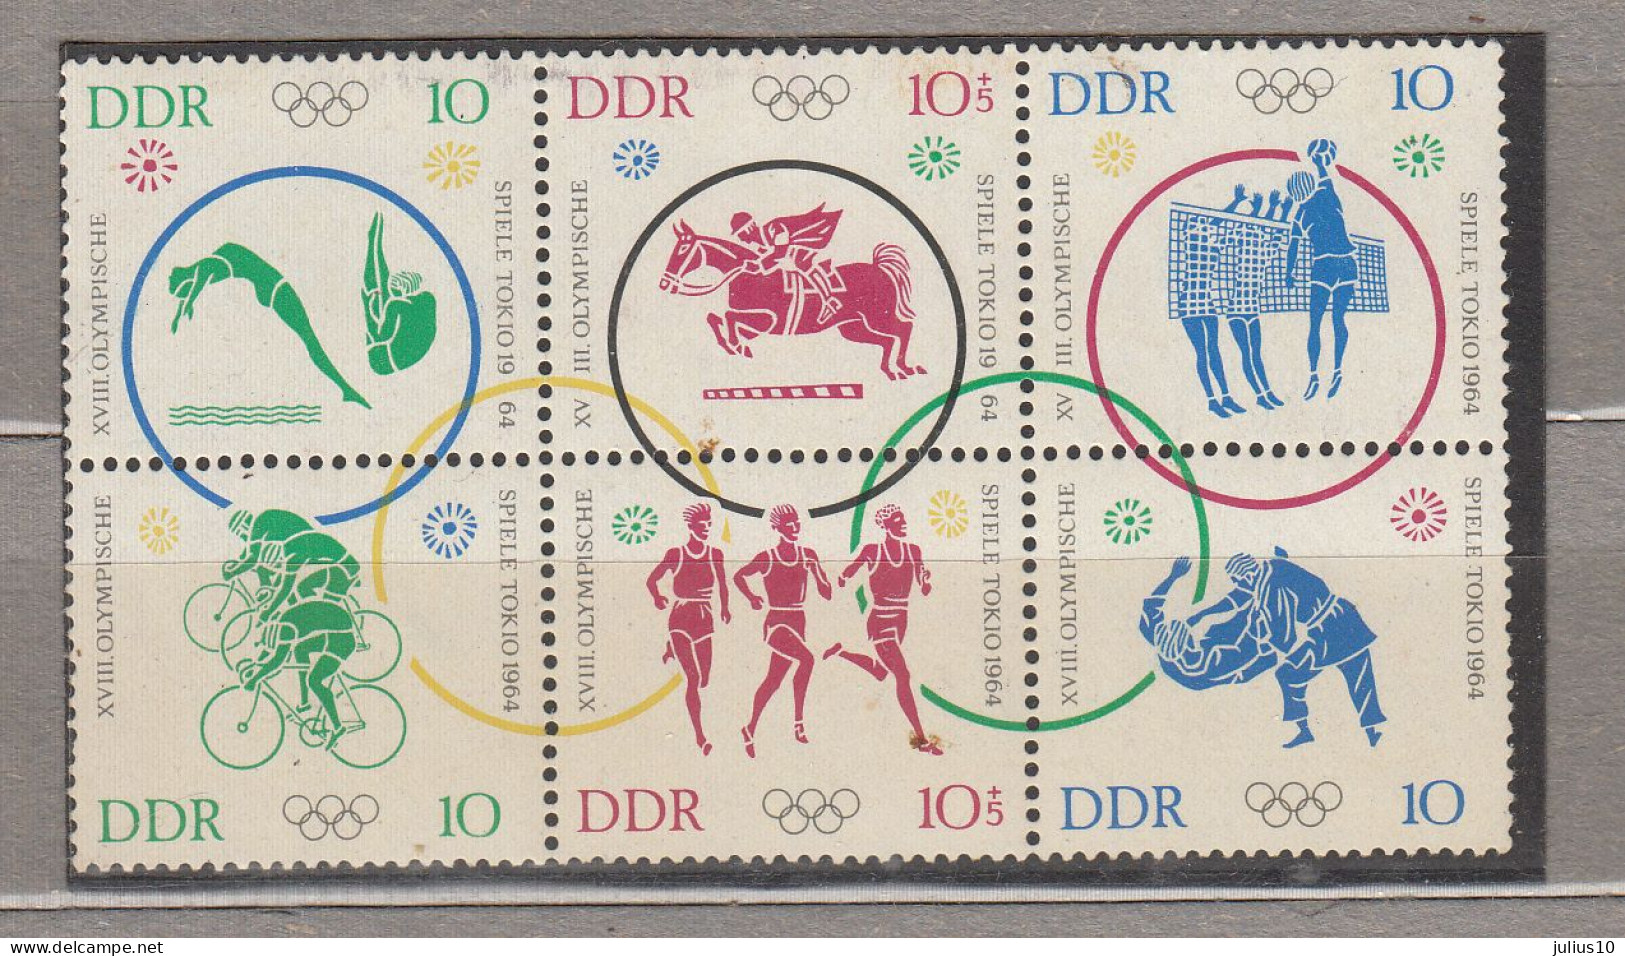 GERMANY DDR Olympic Games 1964 MNH (**) Michel 1039-1044 #Sp190 - Ete 1964: Tokyo